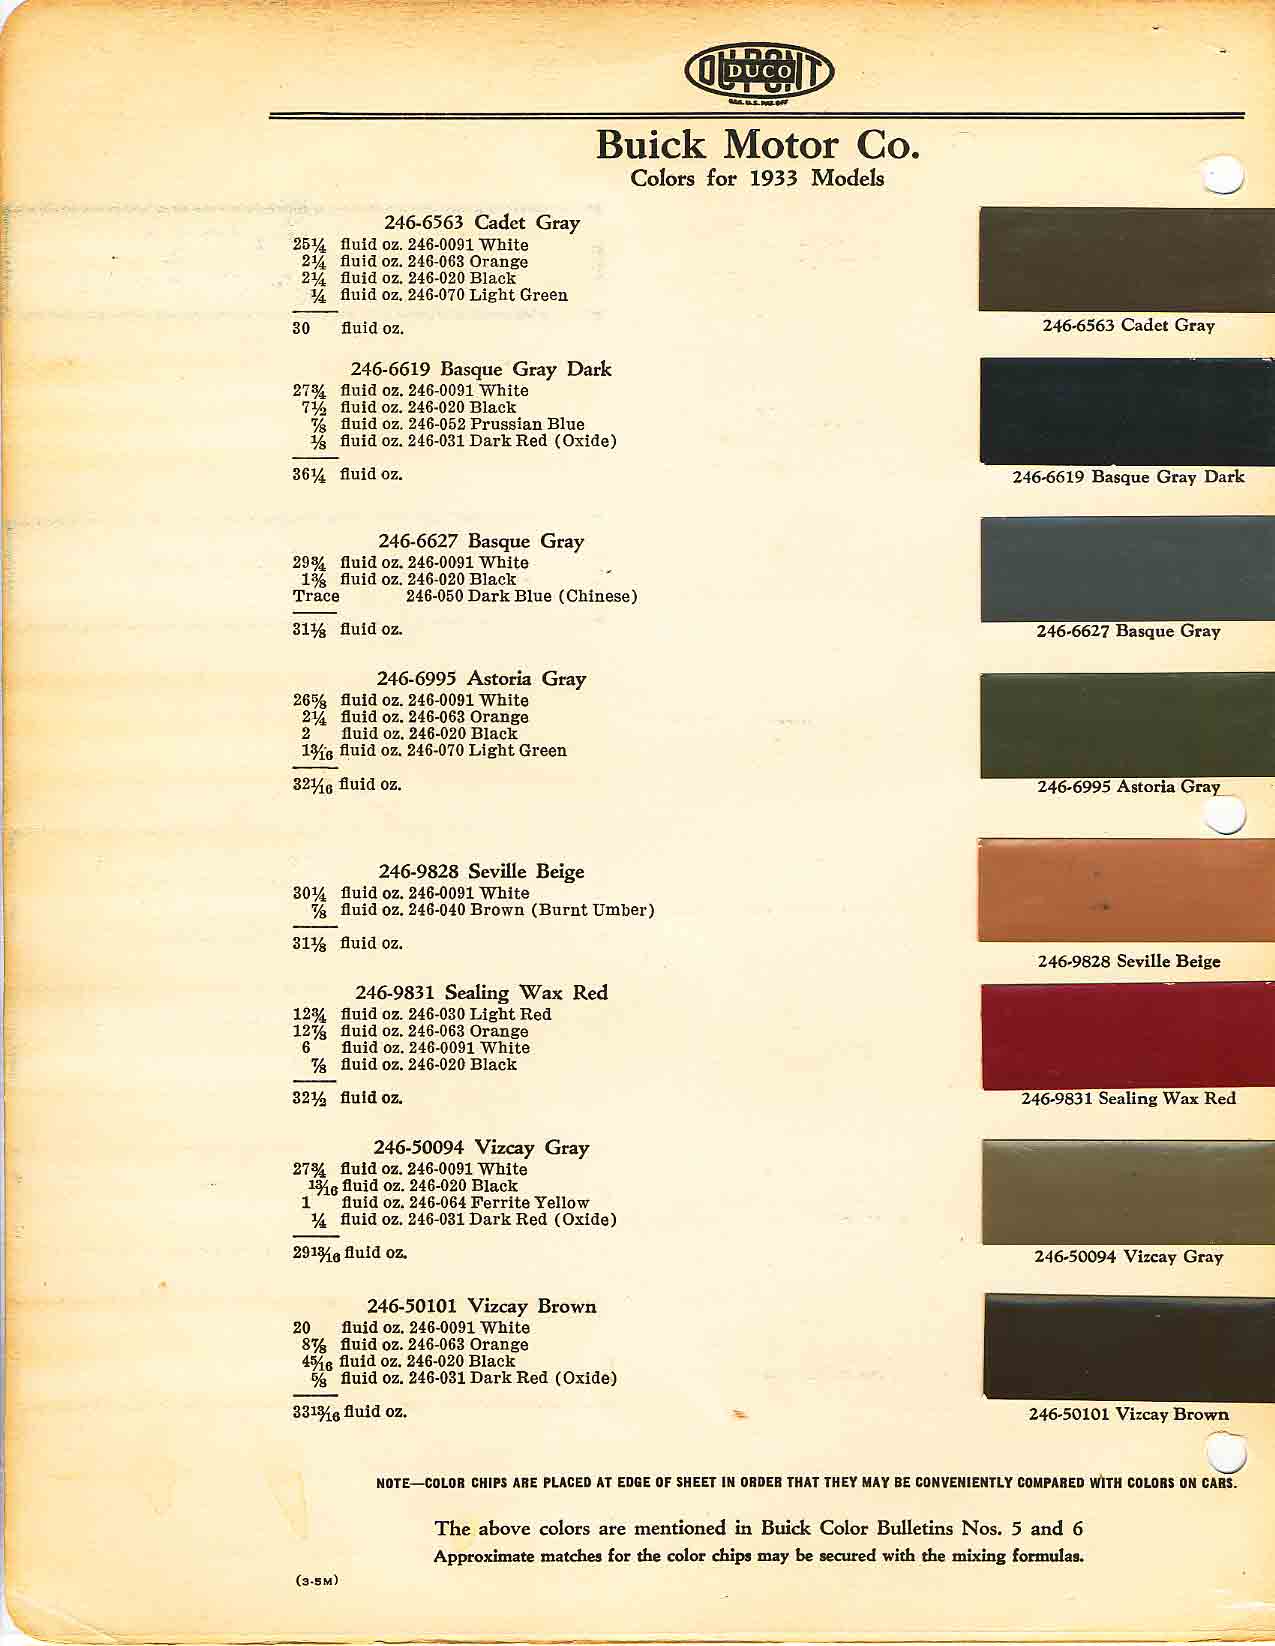 Colors and codes used on Buick Vehicles in 1933